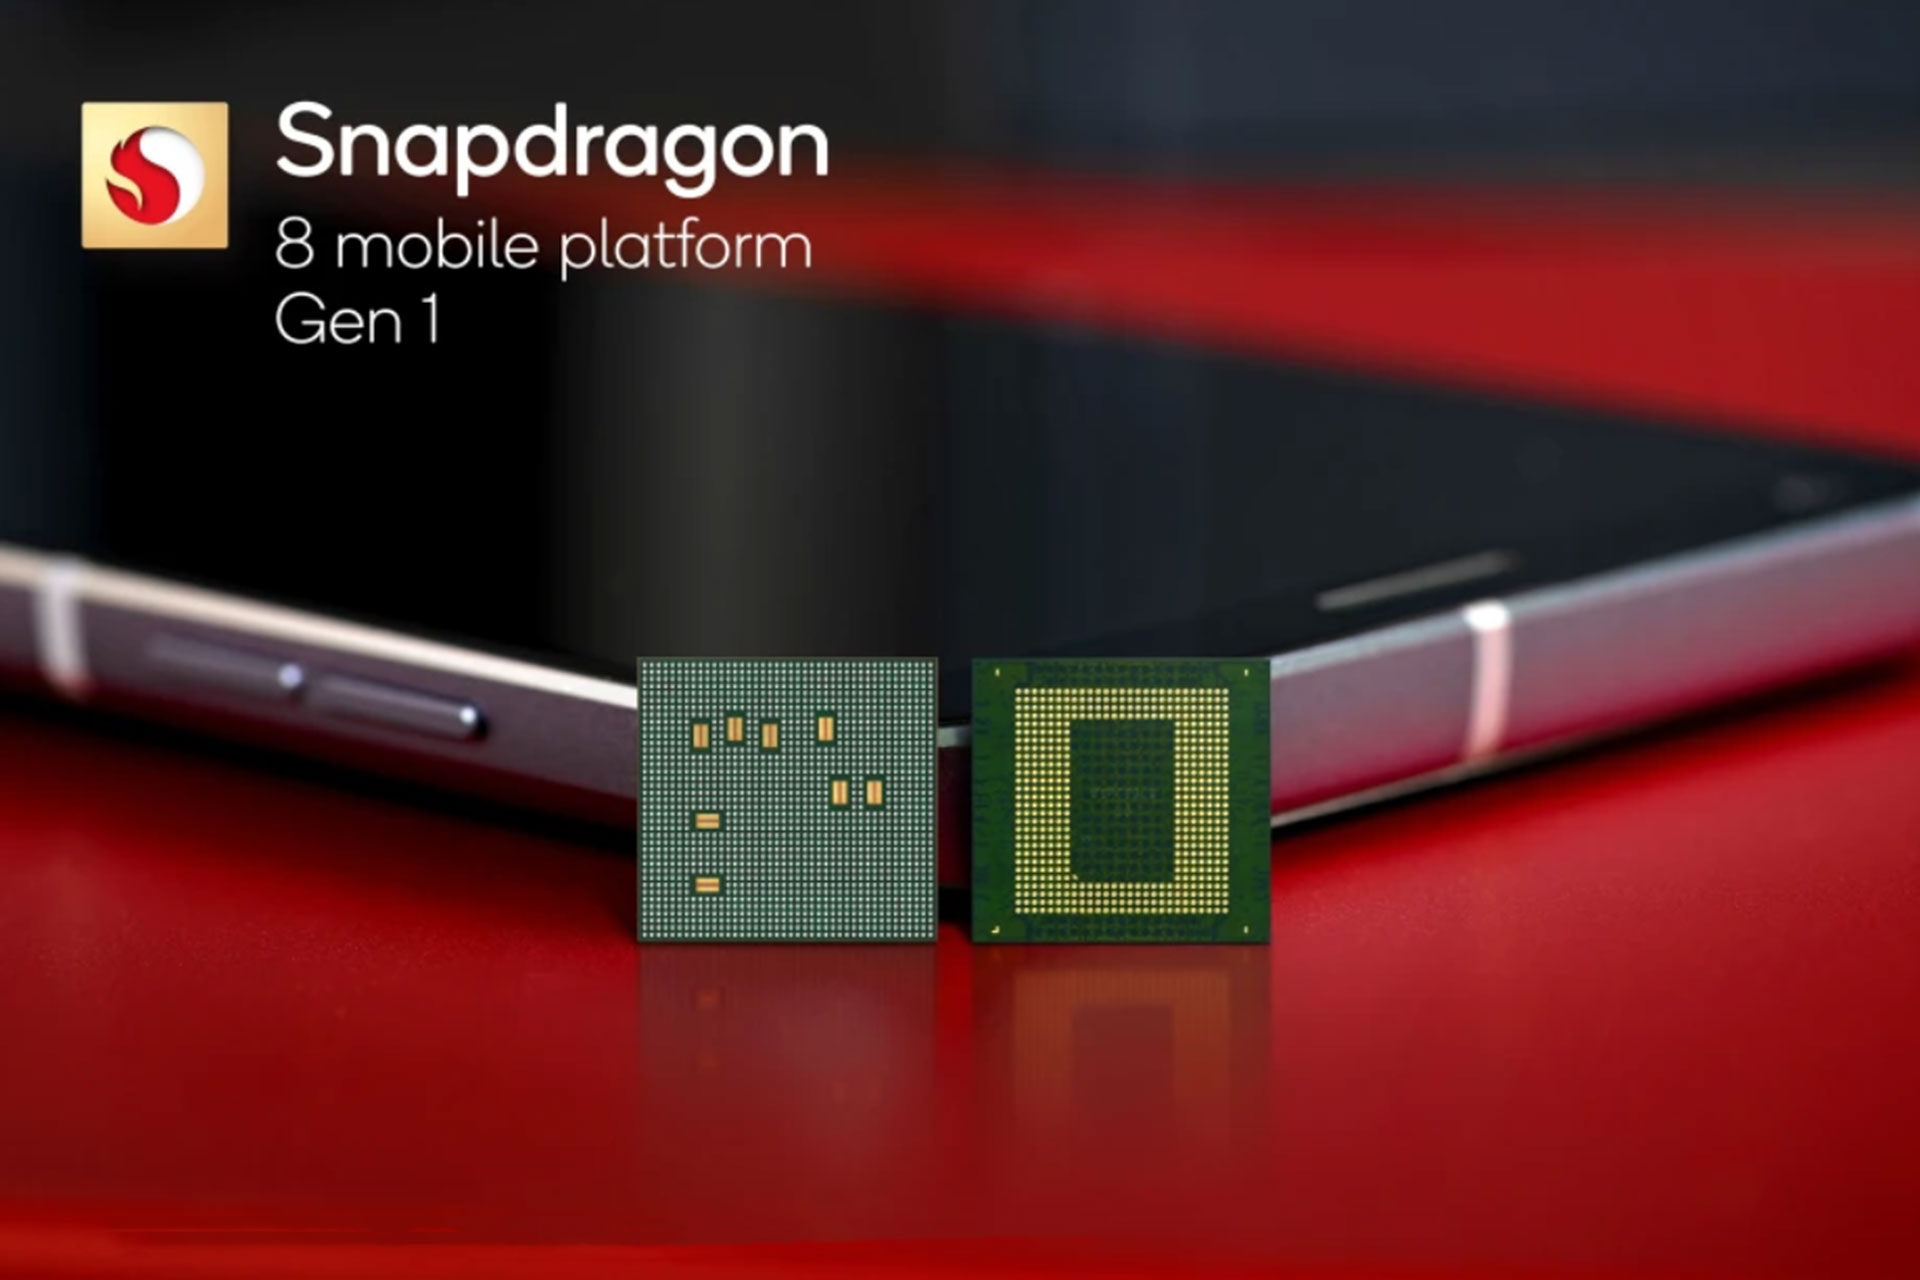 The first generation of Snapdragon 8